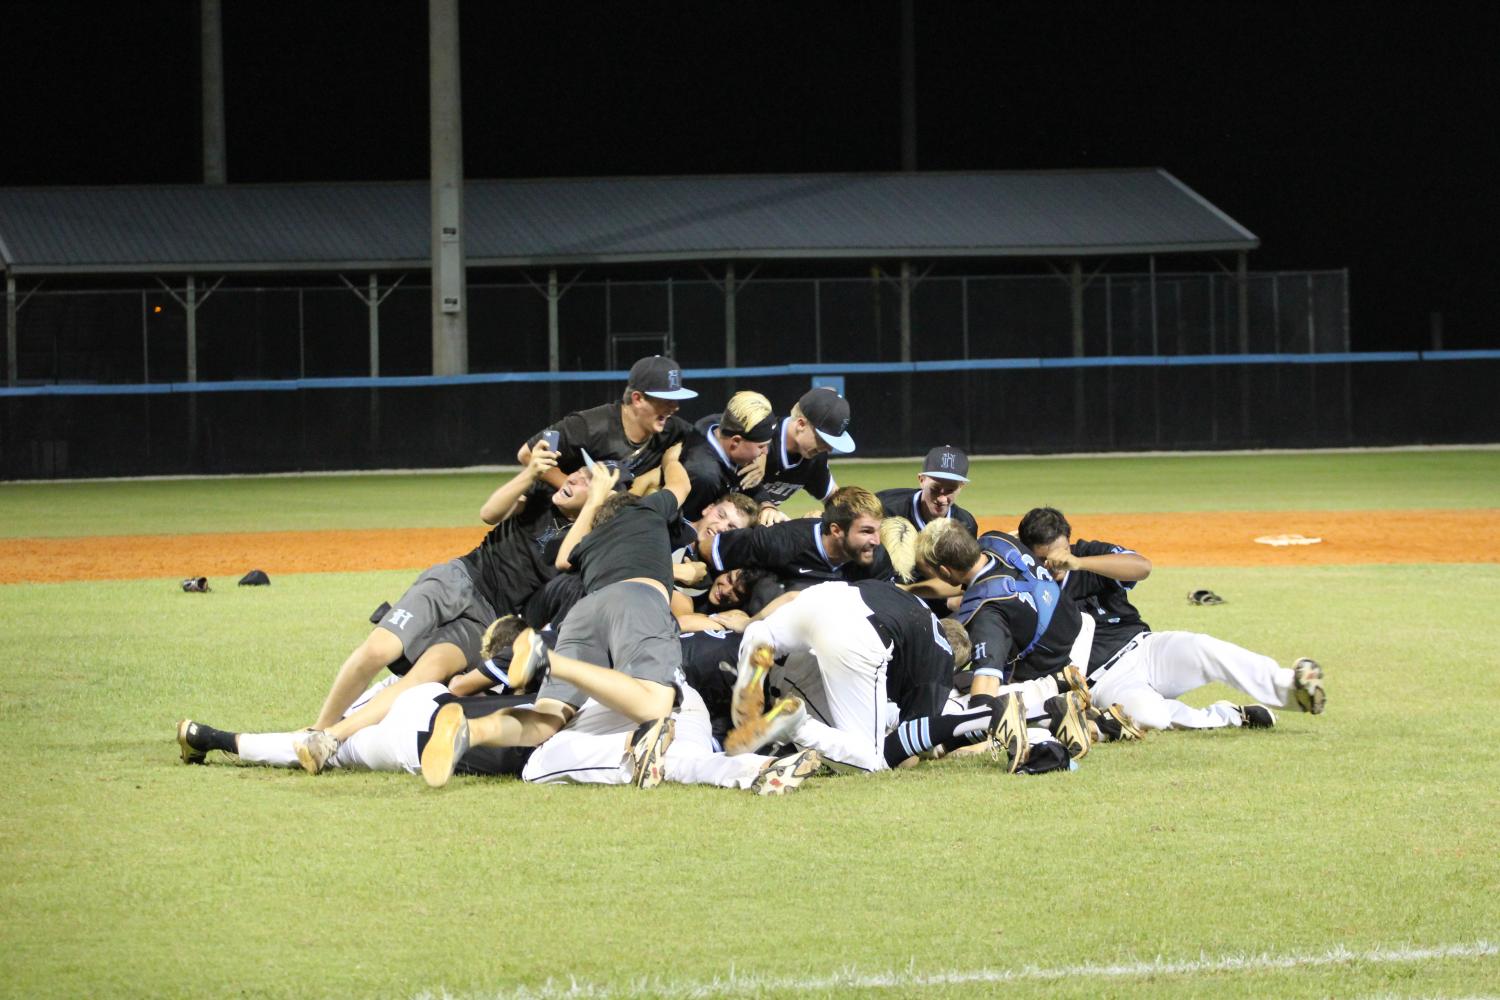 The+baseball+team+celebrates+after+a+6-2+win+in+the+regional+final+against+George+Jenkins.+The+team+will+play+in+the+state+semifinals+on+Friday%2C+June+2+against+Sarasota+in++Fort+Meyers.+